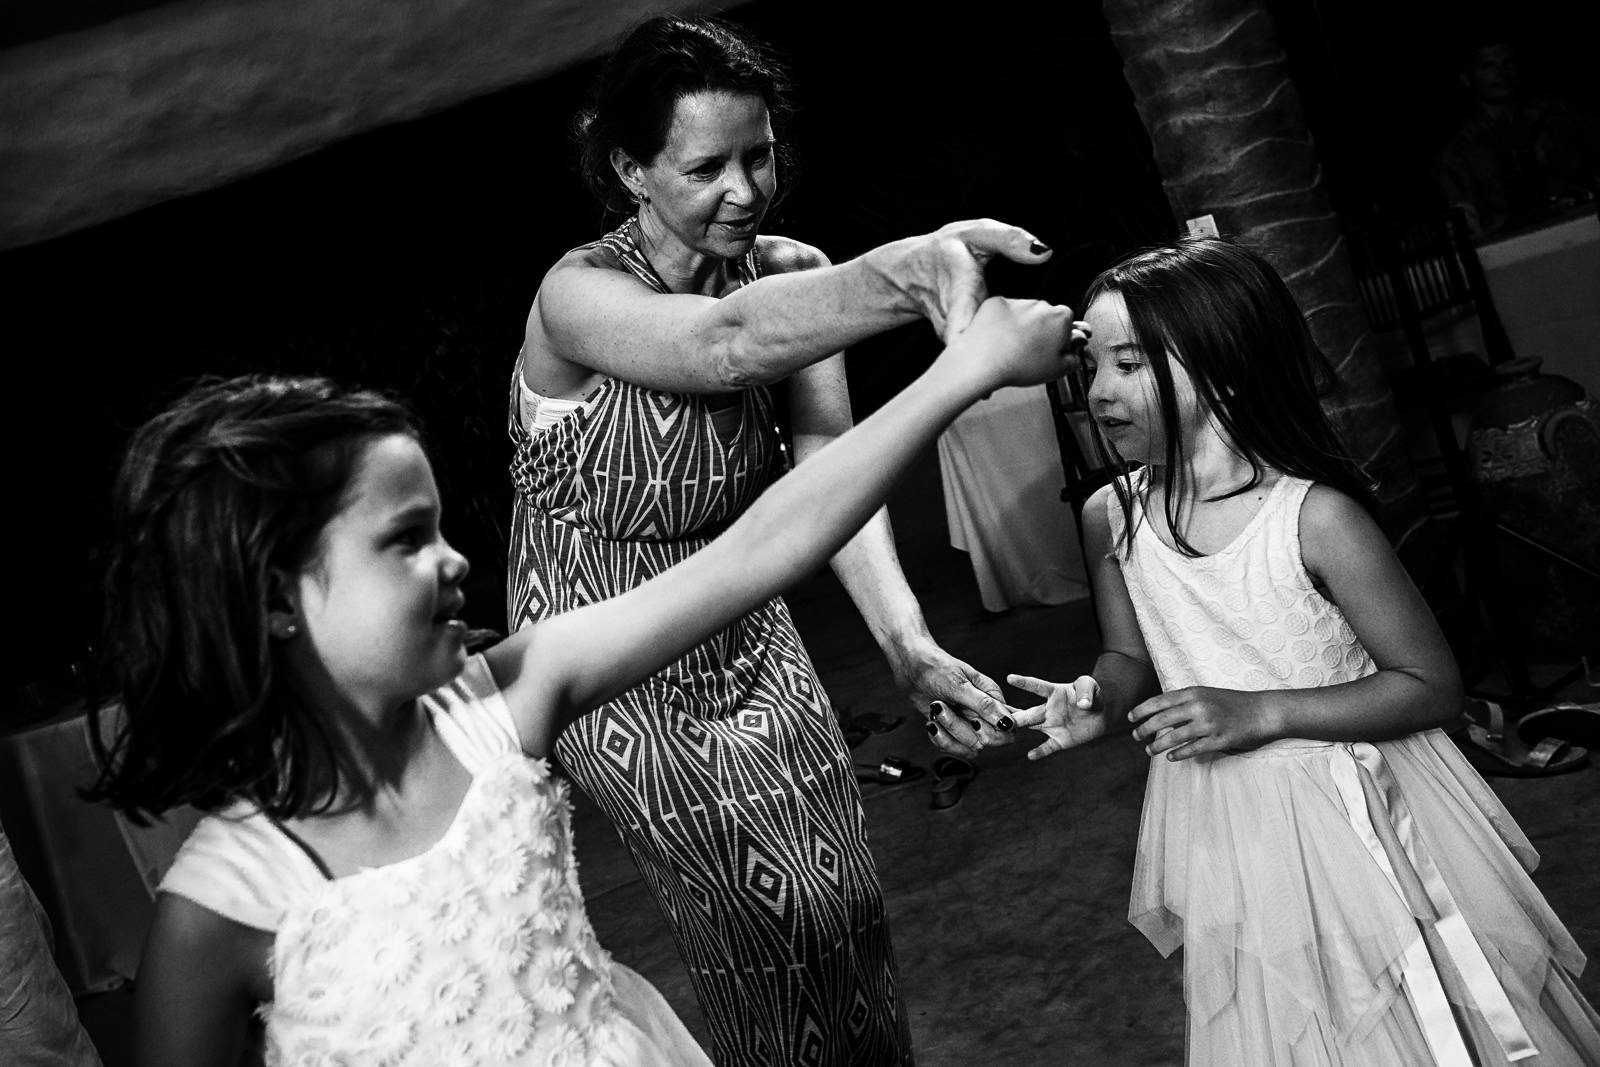 Adult wedding guest dances with two little girls in the dance floor at the party